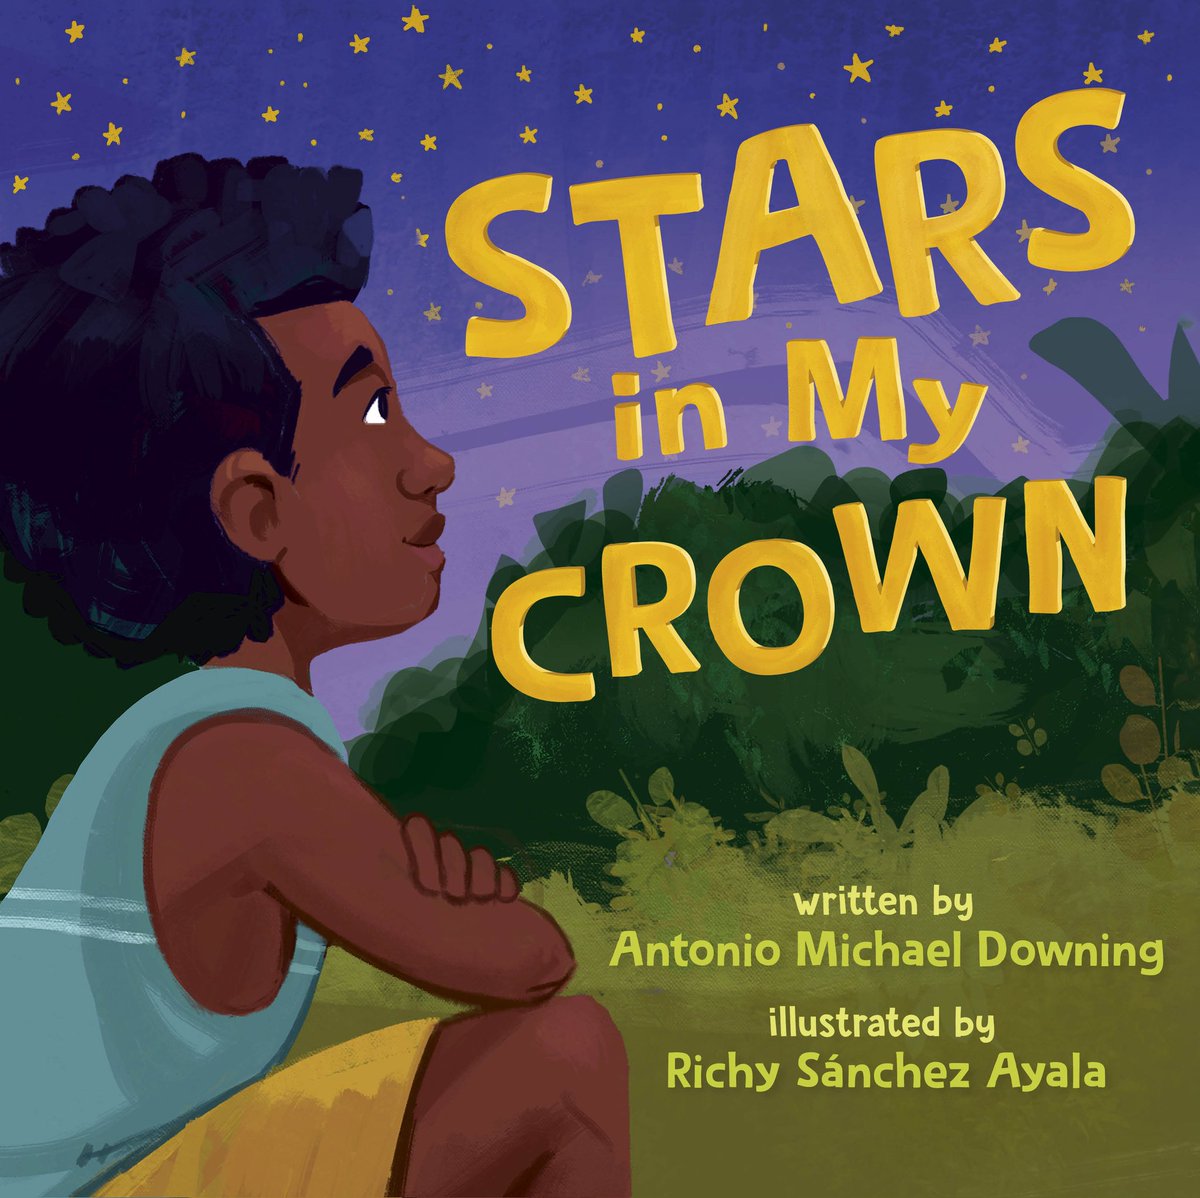 STARS IN MY CROWN, my debut children's picture book will be released on July 2nd! BIGUPS to @TundraBooks & @BNBuzz for teaming up on this 25% presale discount 🌟🎉🌟 barnesandnoble.com/w/stars-in-my-…